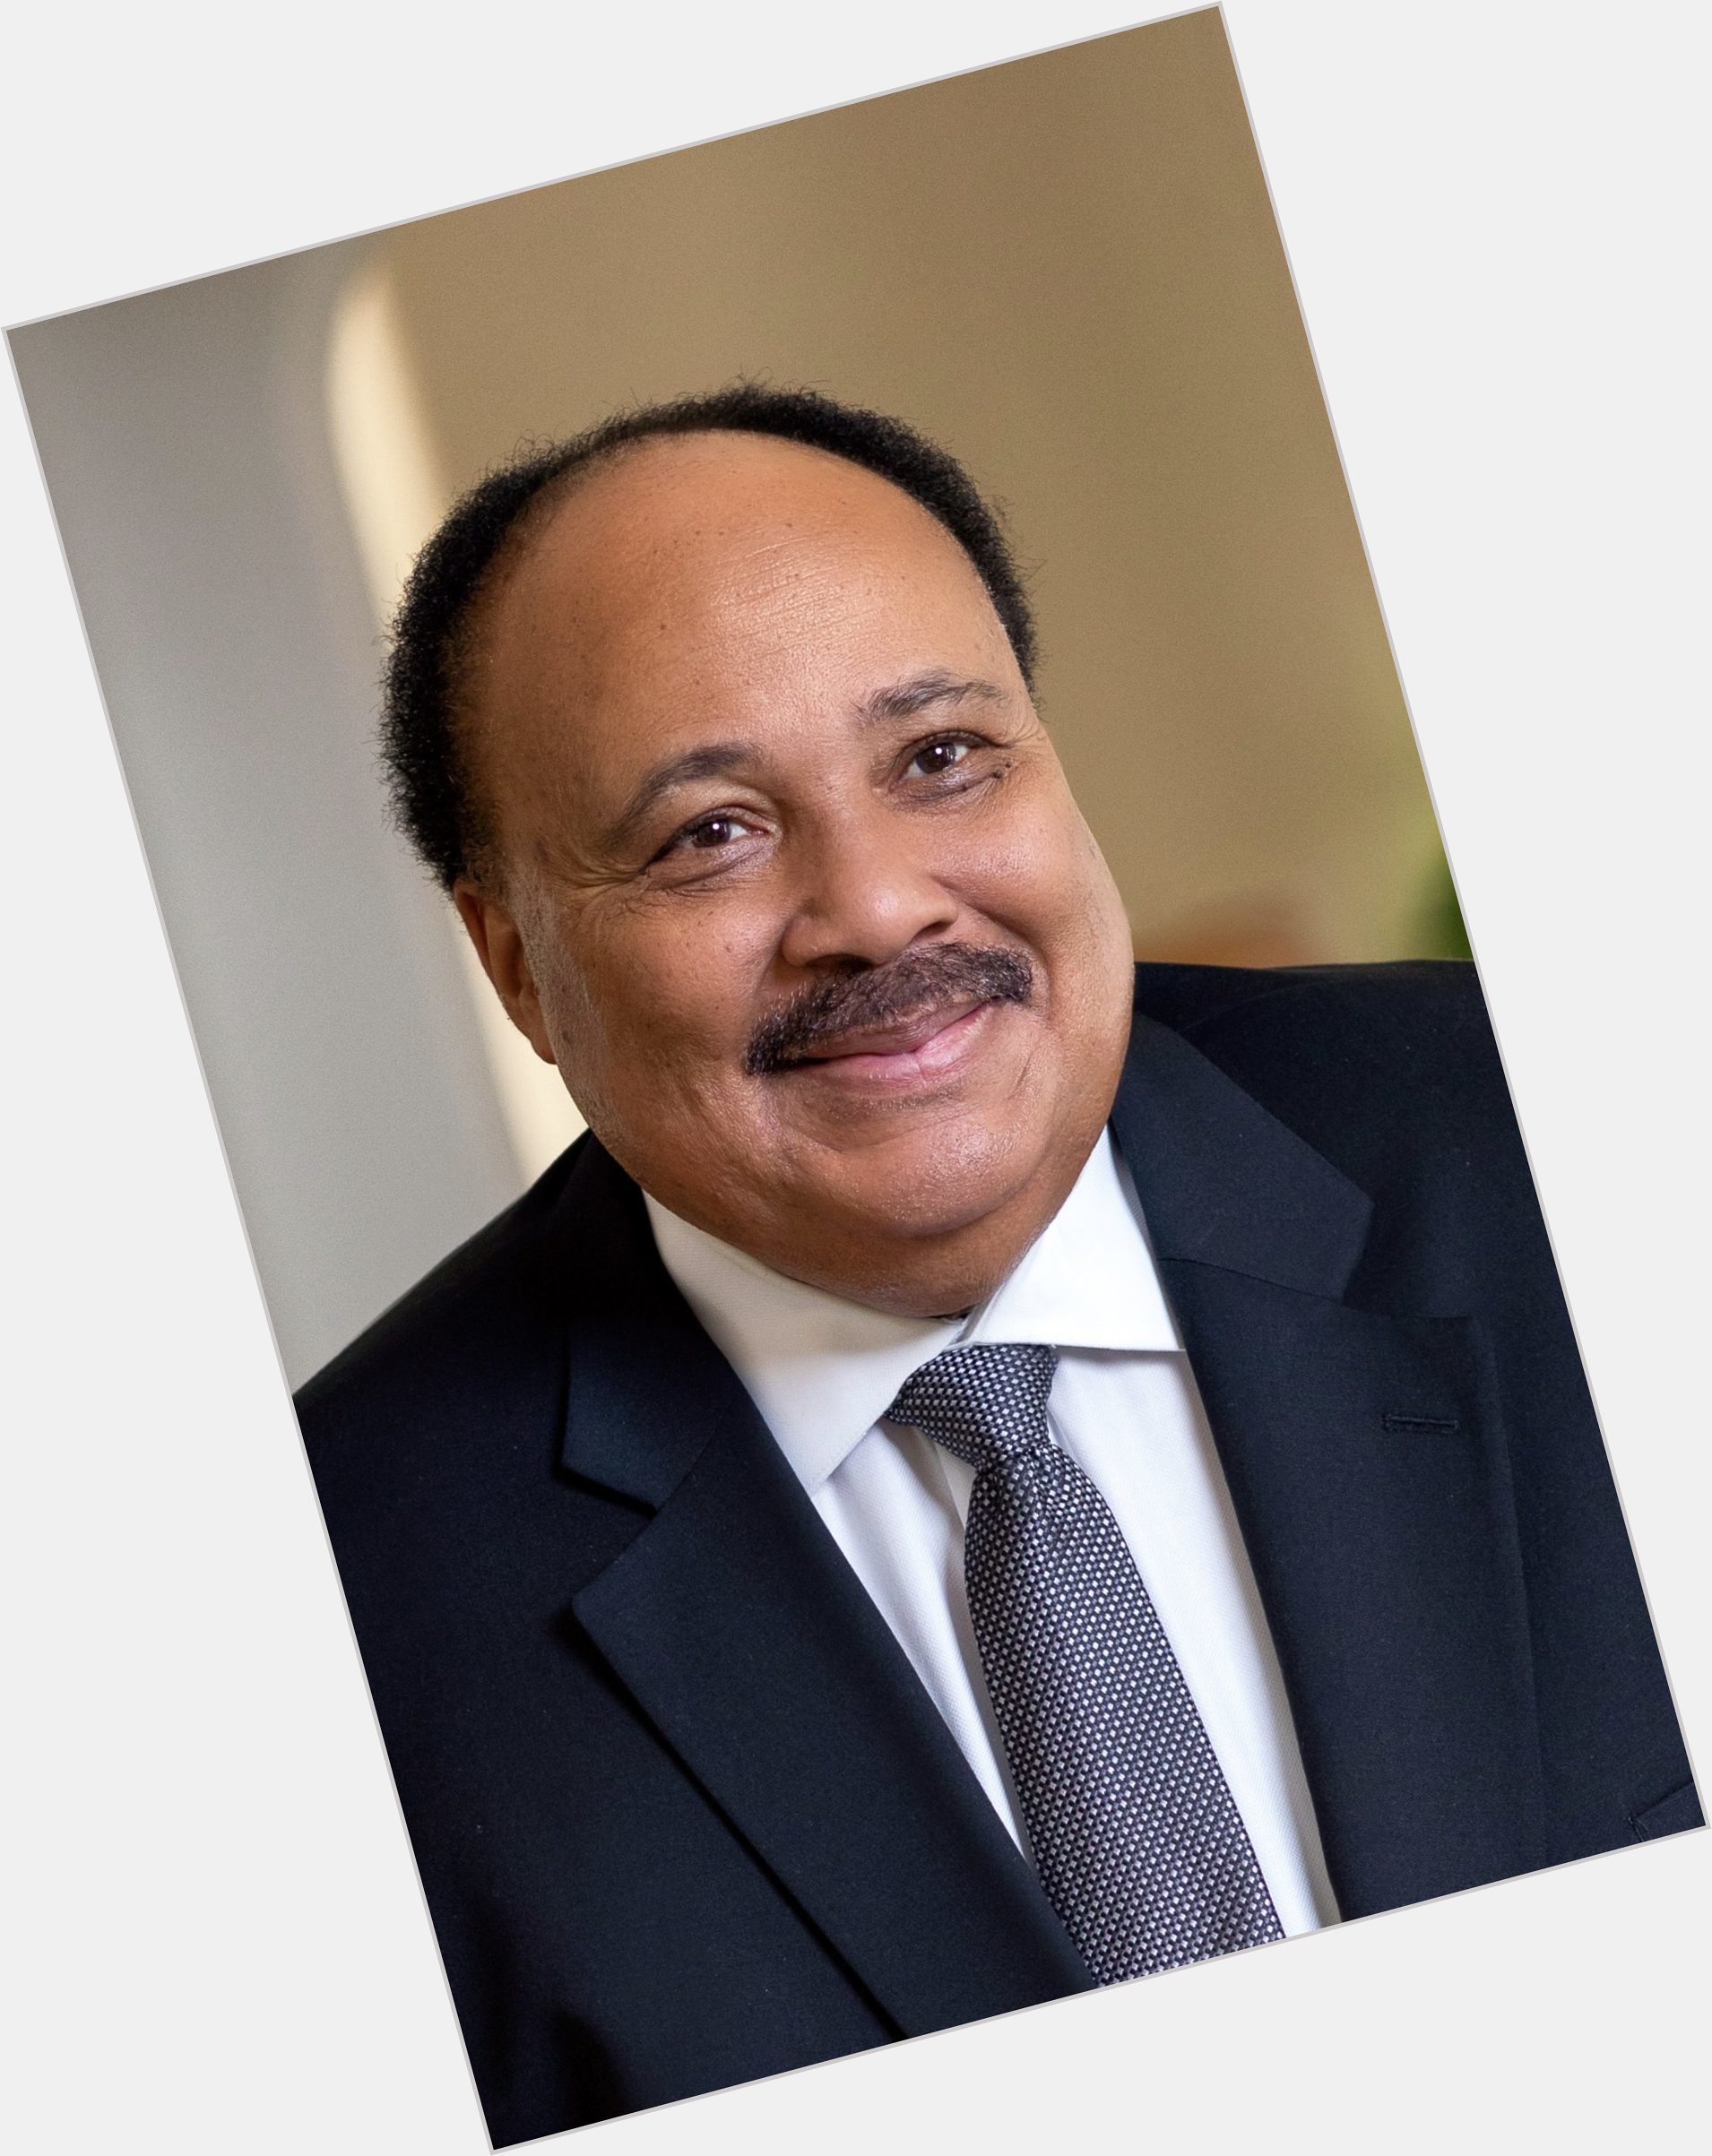 Https://fanpagepress.net/m/M/Martin Luther King Iii New Pic 1